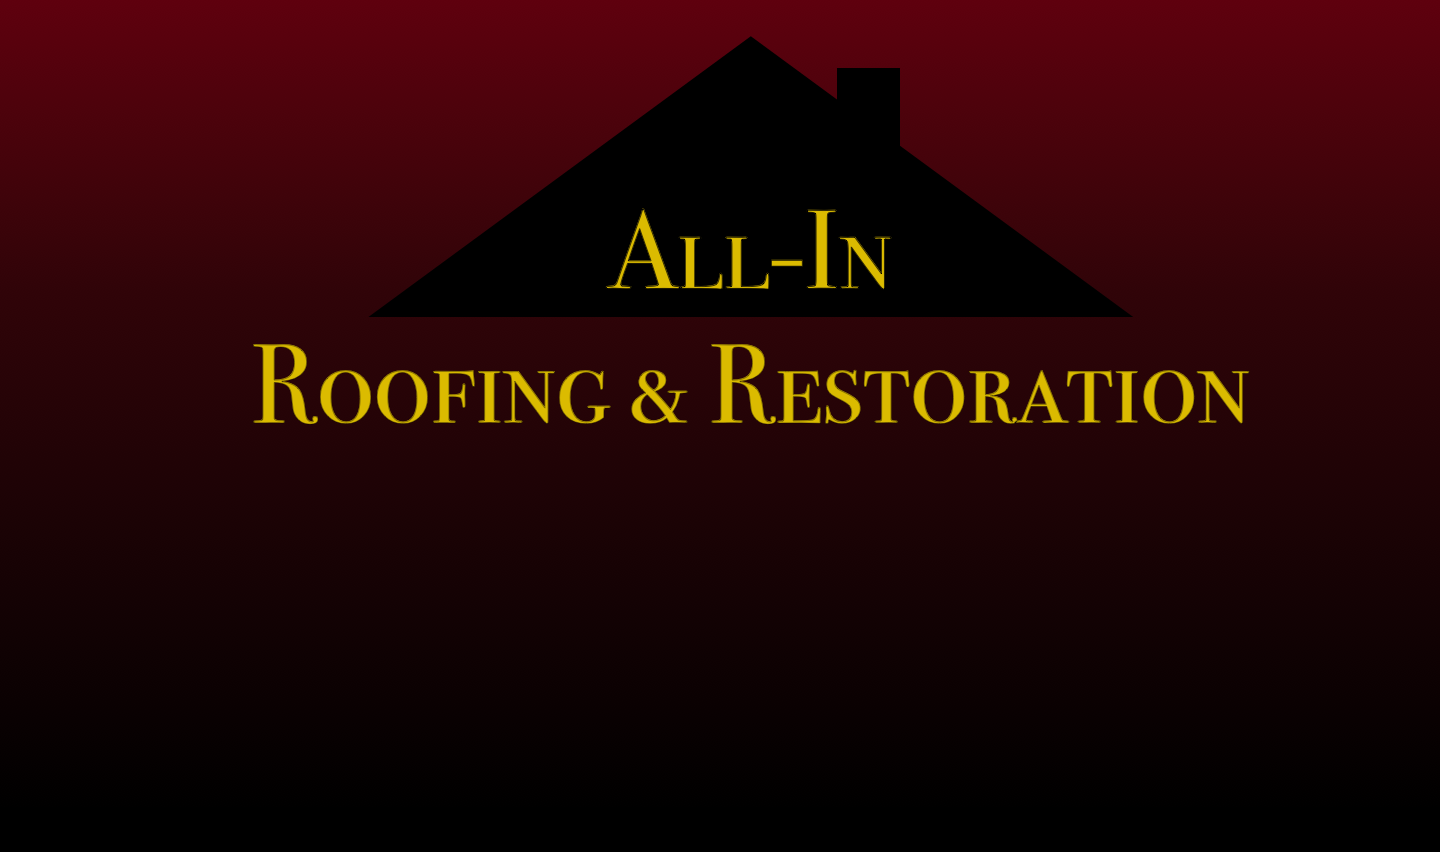 All-In Roofing & Restoration 13573 Janell Dr, Columbia Station Ohio 44028